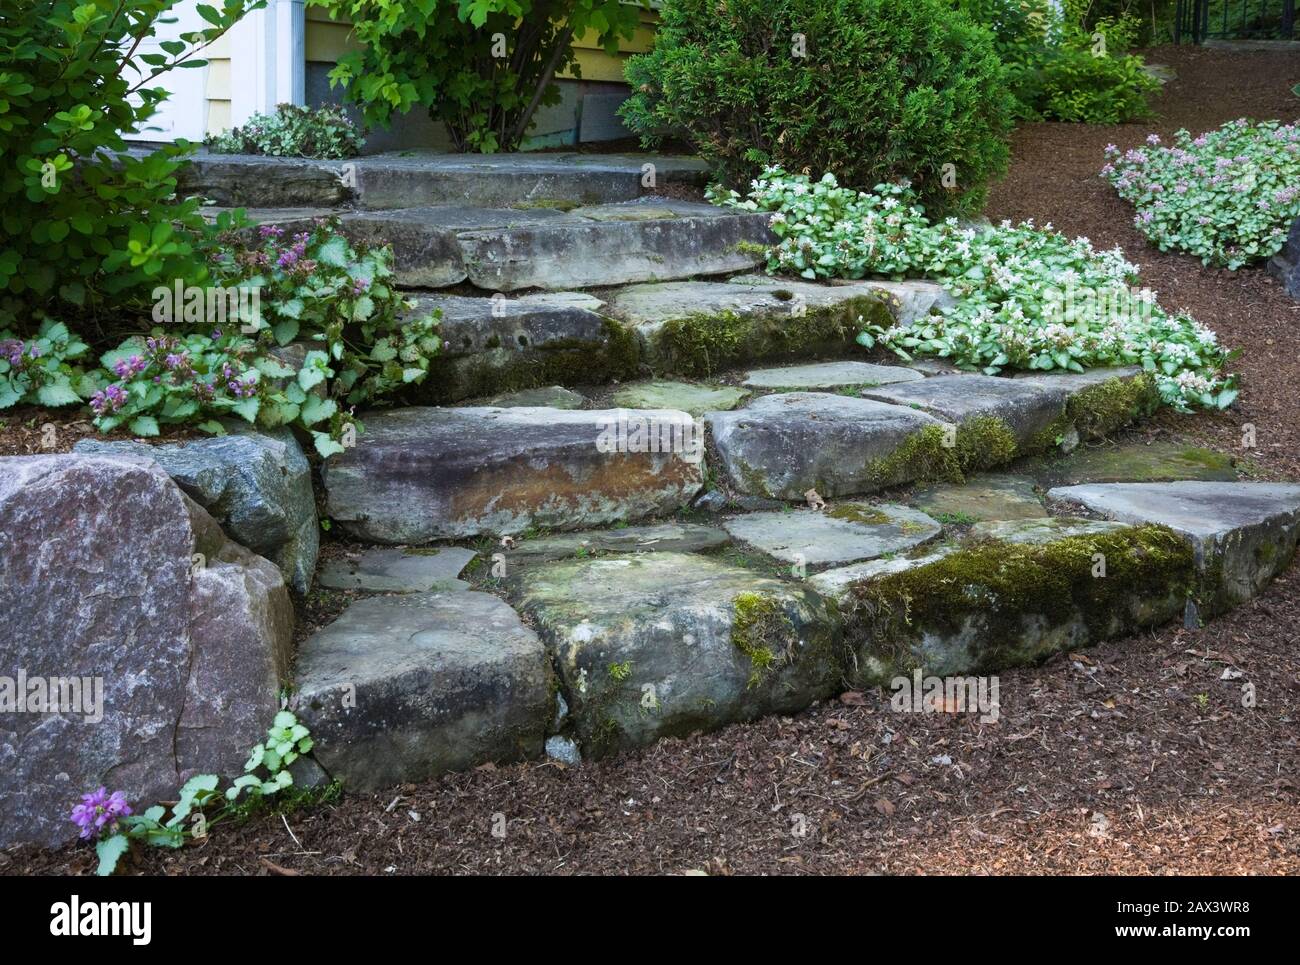 Natural stone steps covered with green Bryophyta - Moss and lichen growth borderd by purple and pink Lamium - Deadnettle flowers in backyard garden. Stock Photo